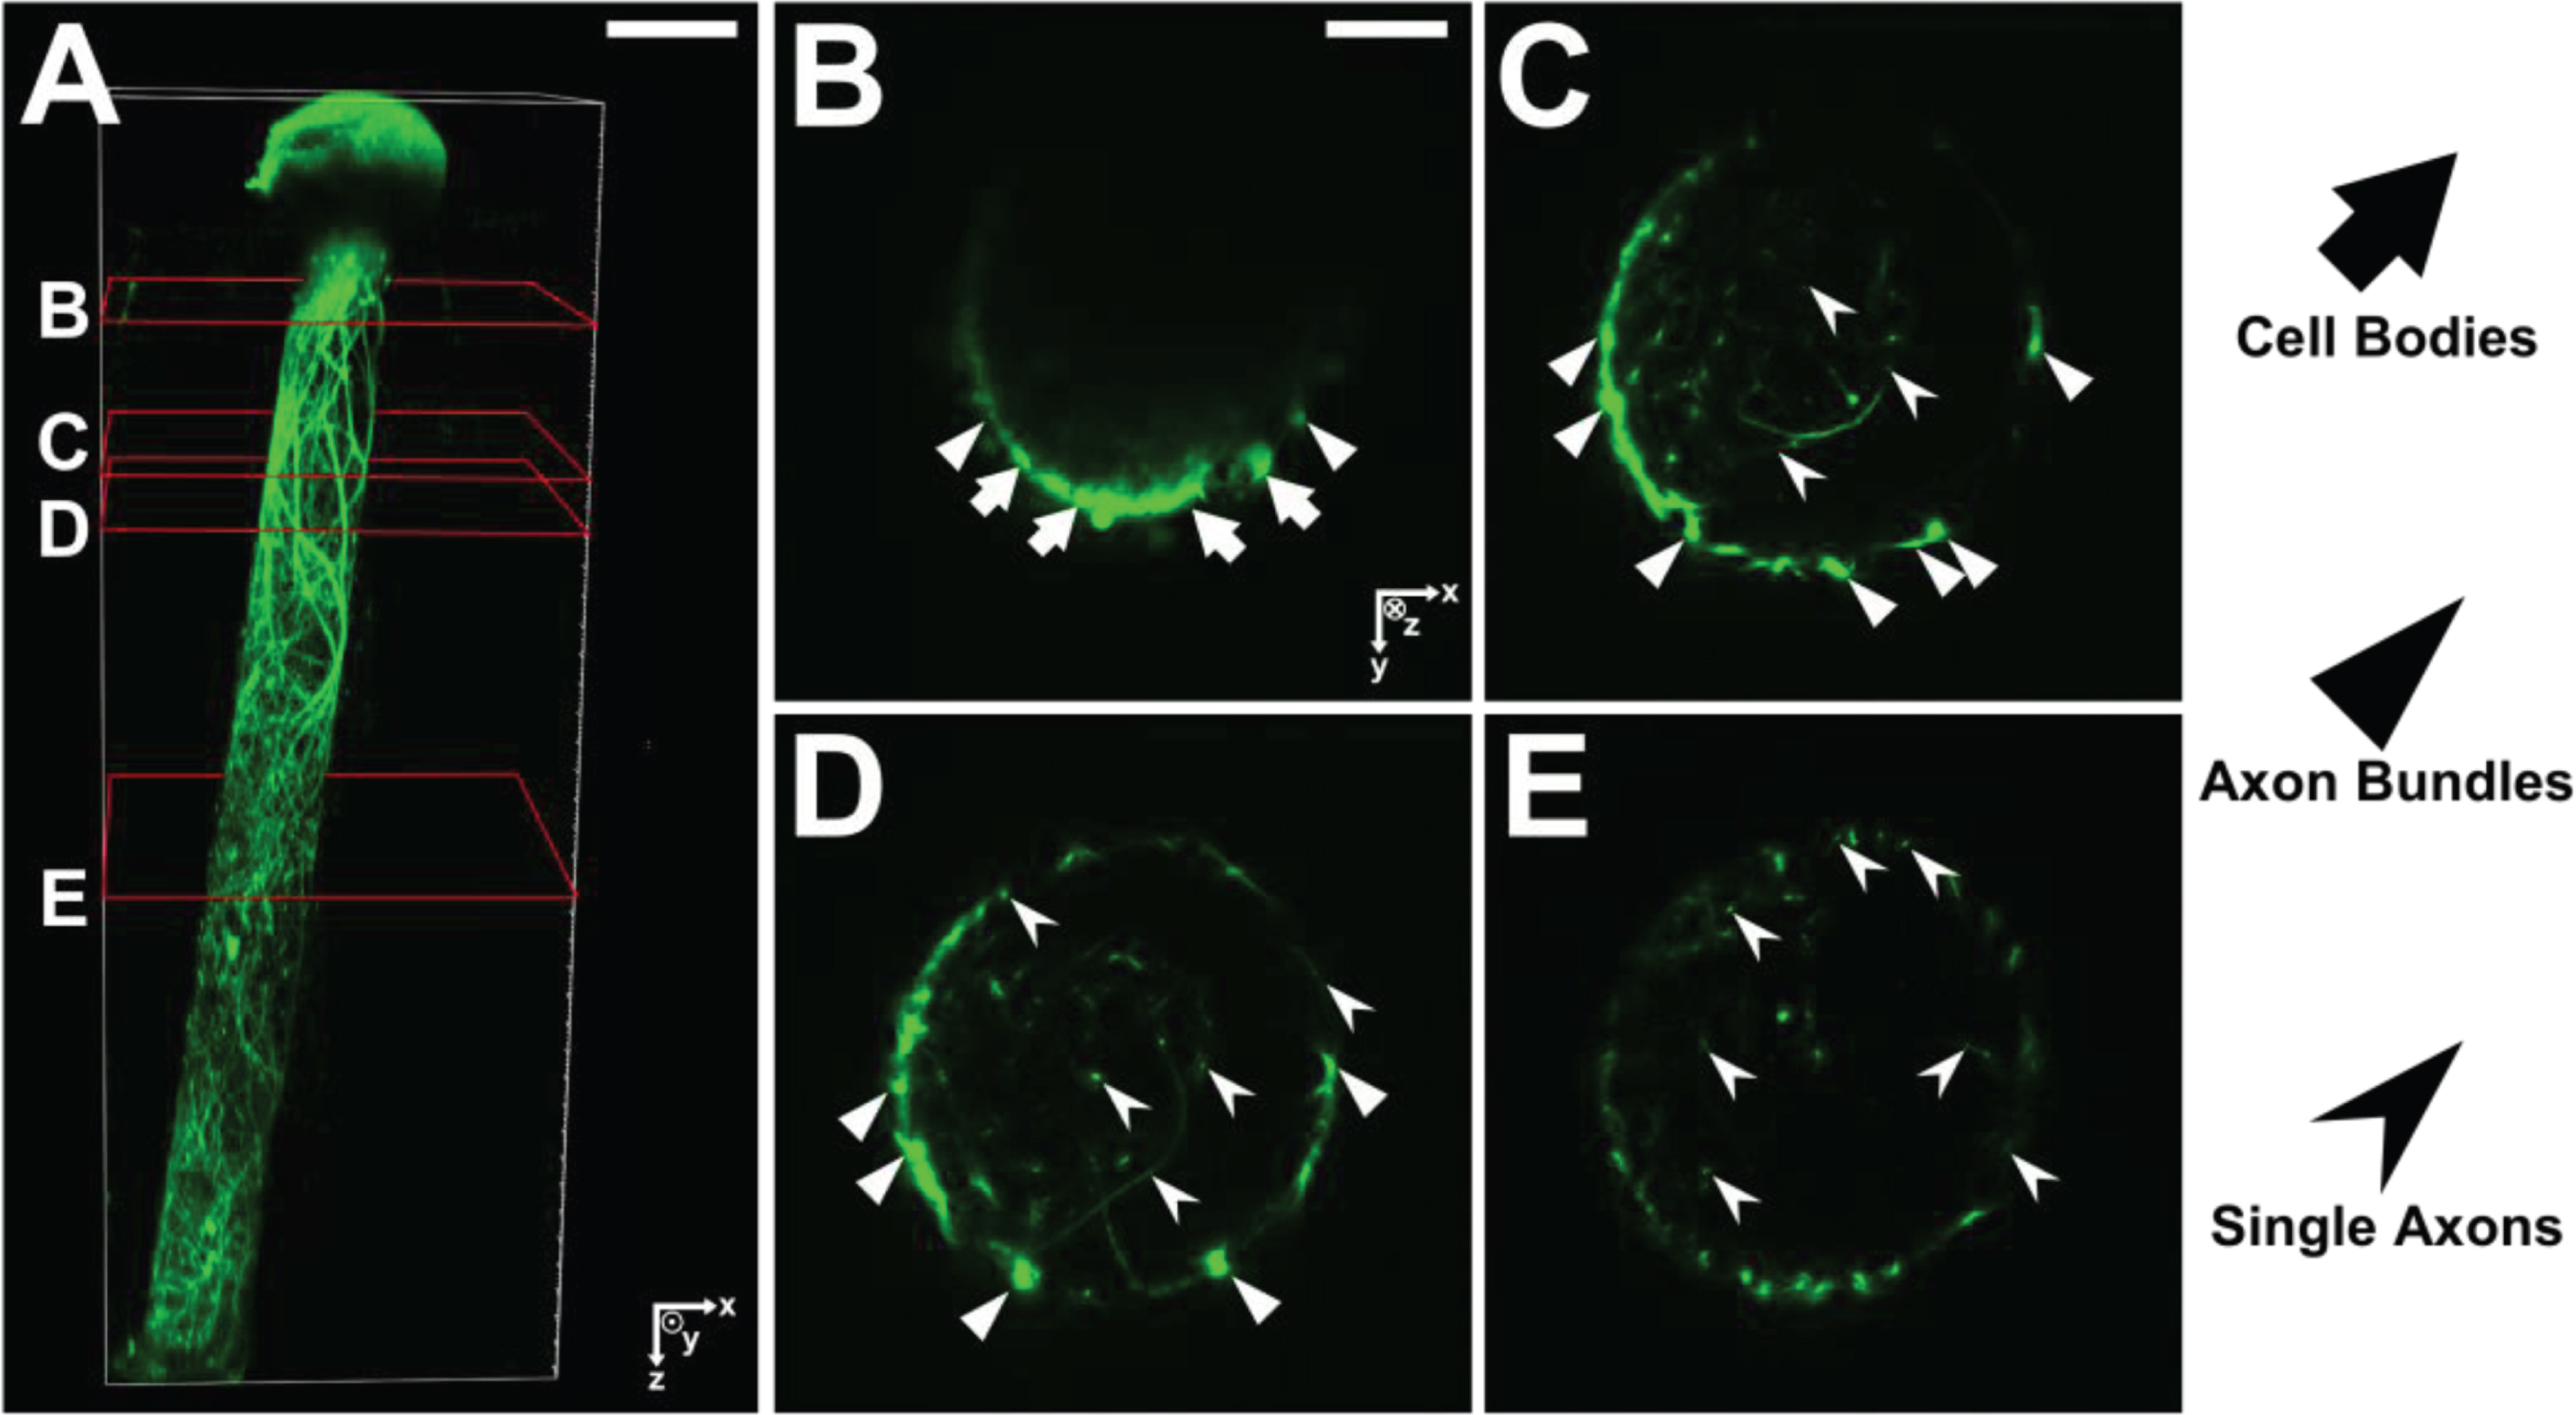 (A) 3D reconstruction of a unidirectional, GFP-positive micro-TENN at 10 DIV. (B–E) X–Y projections of the micro-TENN from (A) at the sections outlined in red. Orientation of the z-axis (positive) is into the page. Neuronal cell bodies (arrows) can be seen near the aggregate region in (B), from which axonal bundles (triangles) project and split into individual axons (caret). Scale bars: 200 μm (A); 50 μm (B).